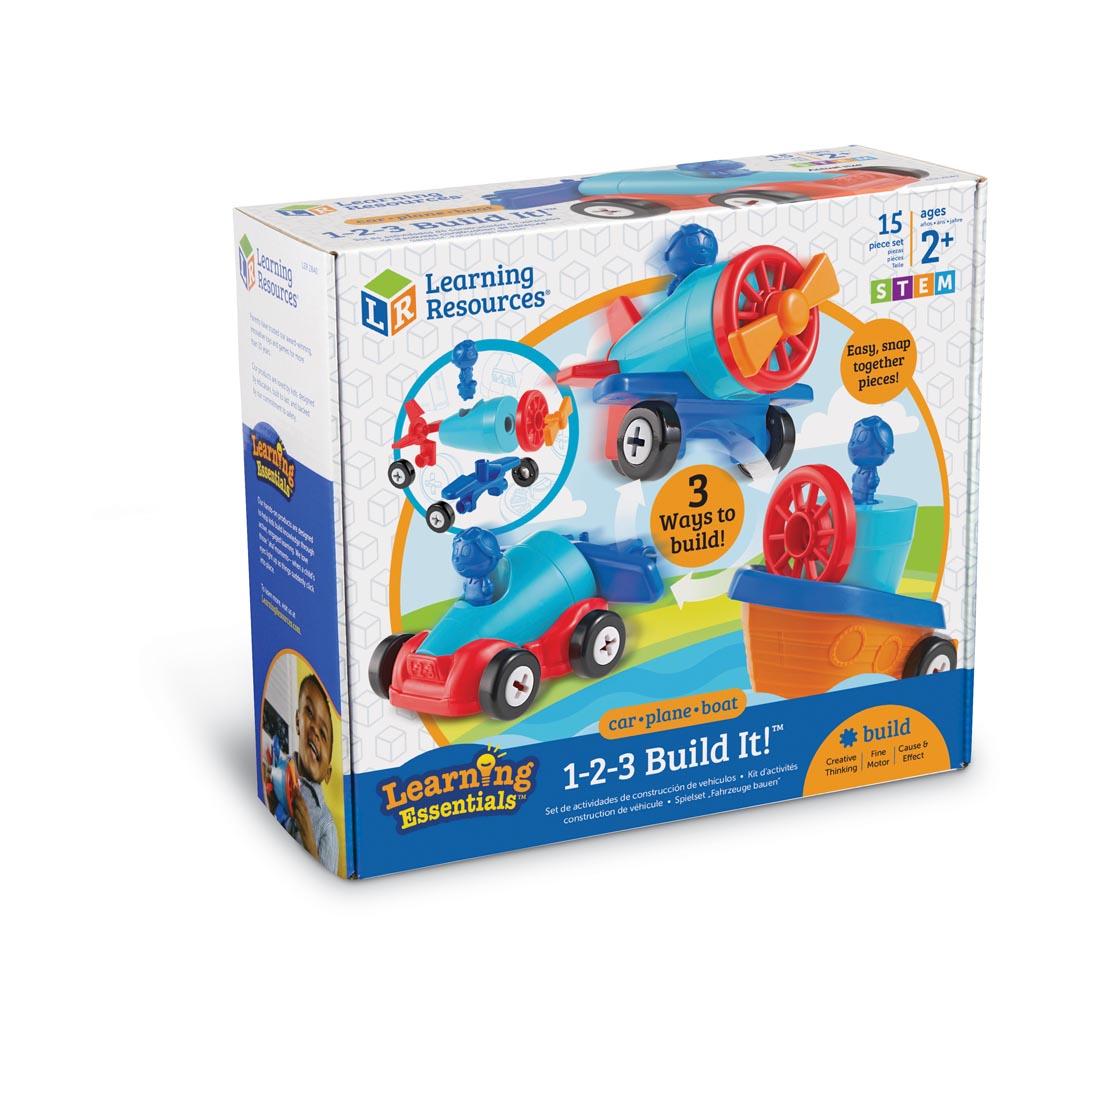 1-2-3 Build It Set that makes either a Car, Plane or Boat